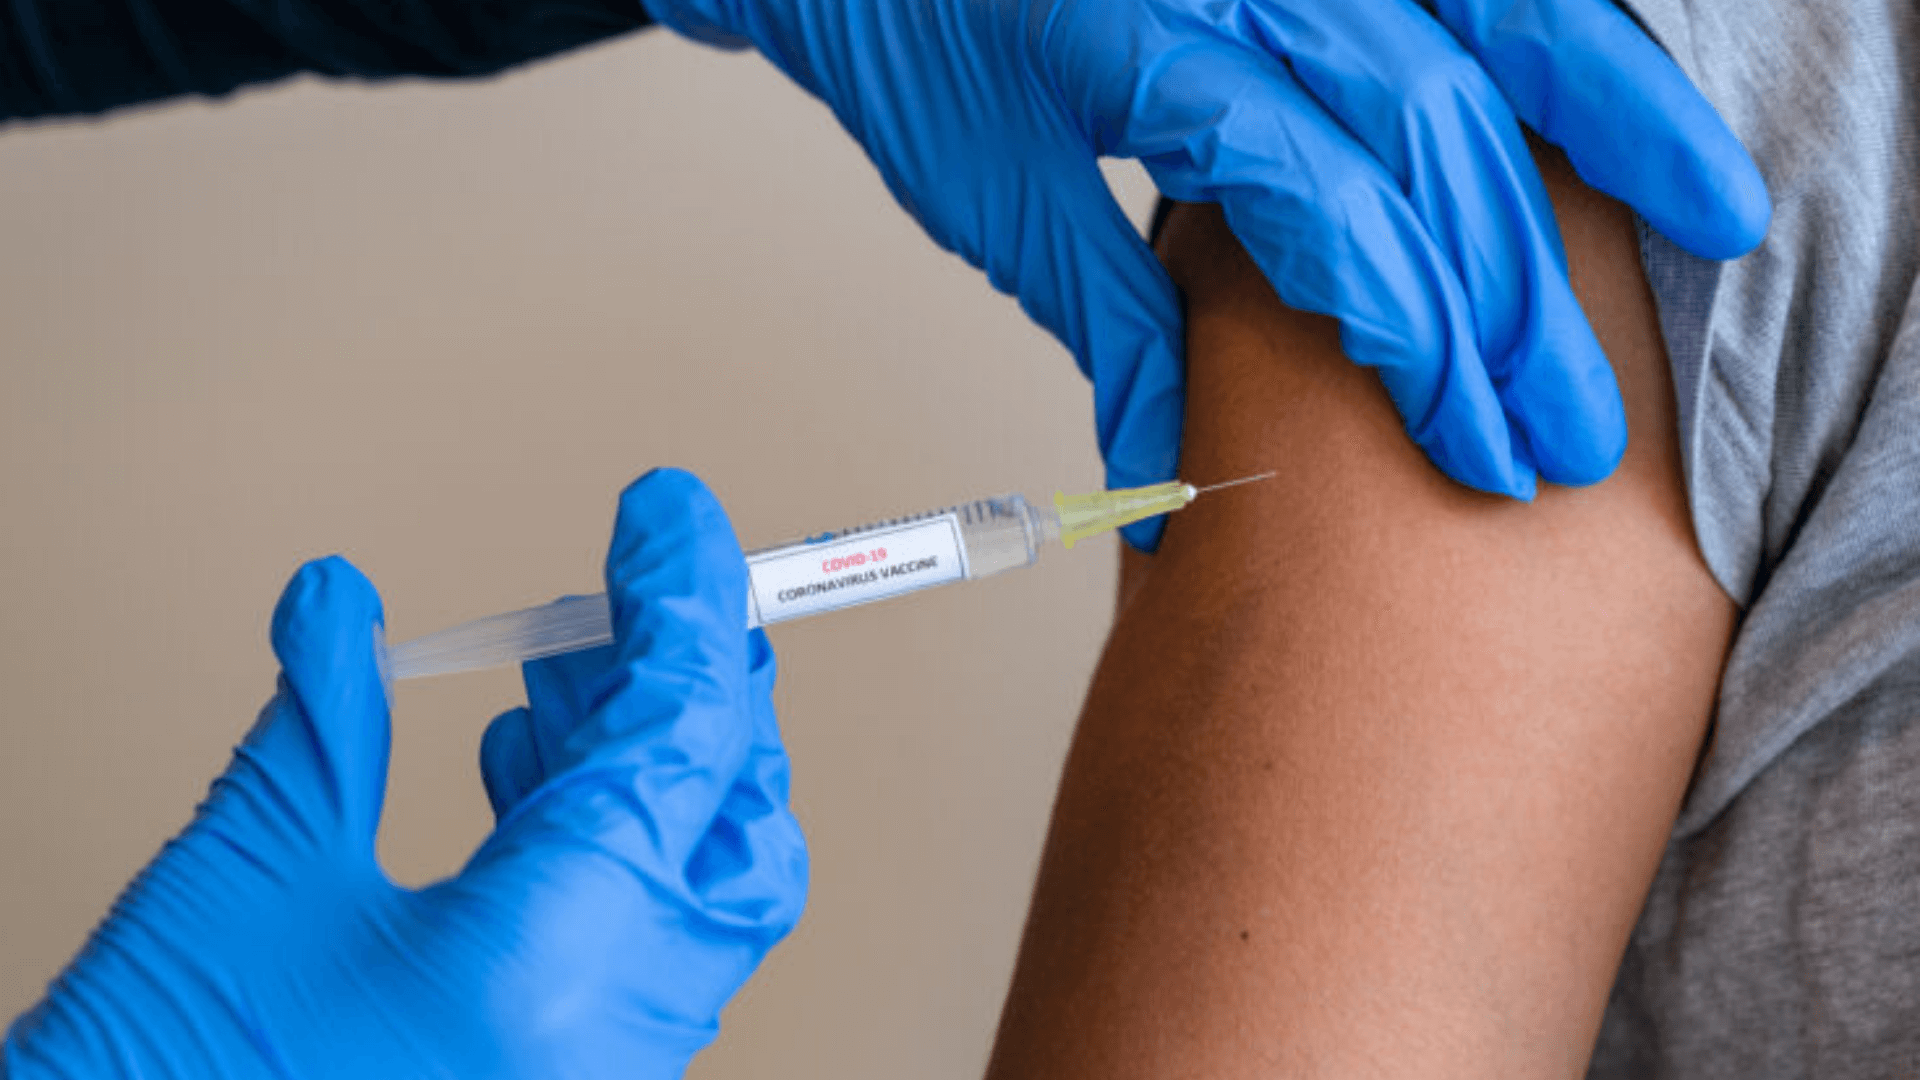 Maryland-School-Reconsiders-Mask-Policy-As-Vaccination-Rates-Rise-1